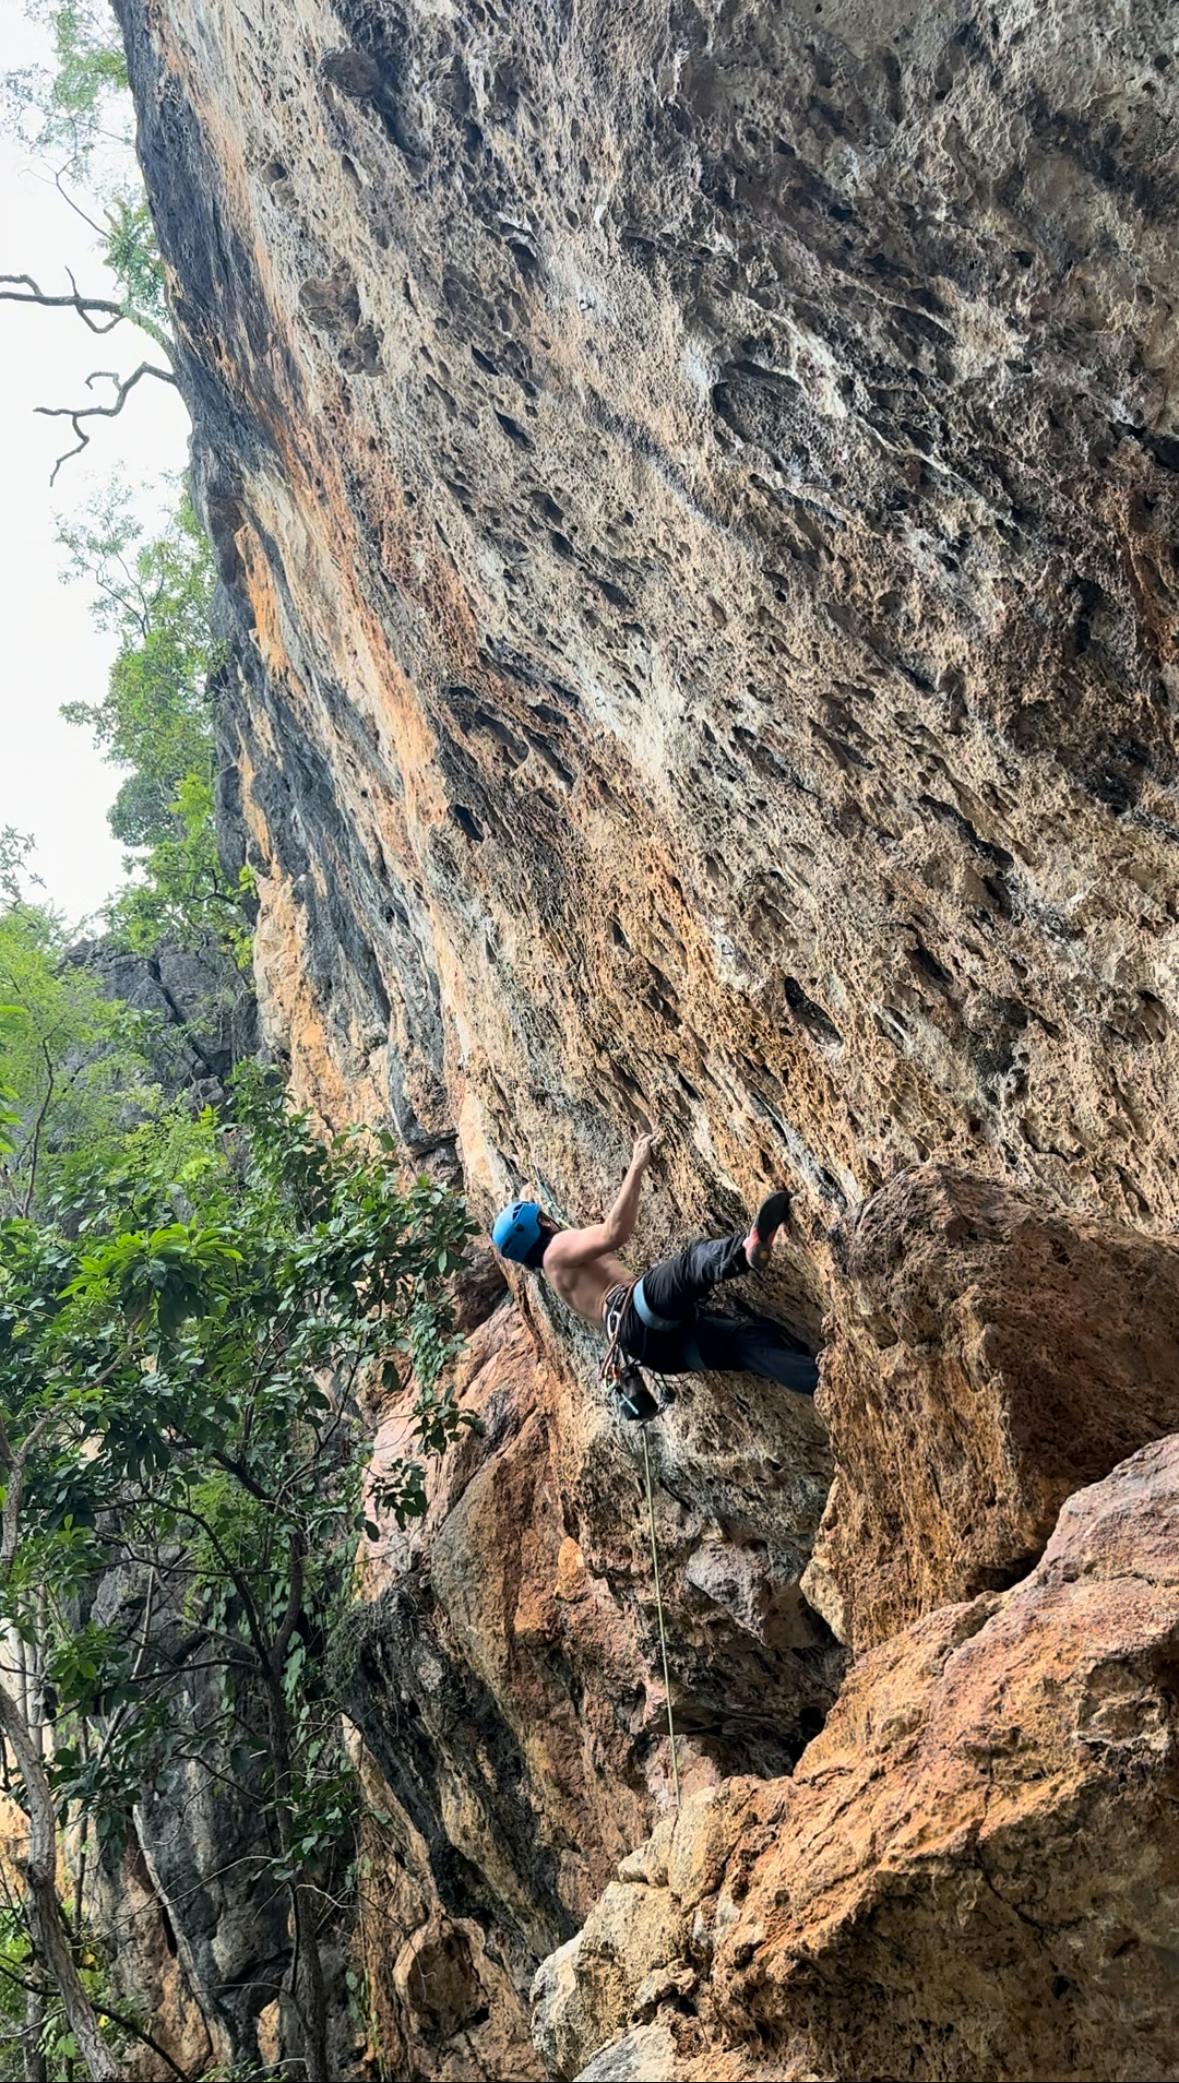 Suud Suud Jai / Put Your Heart Into It 6b+, Heart Wall climbing in Crazy Horse